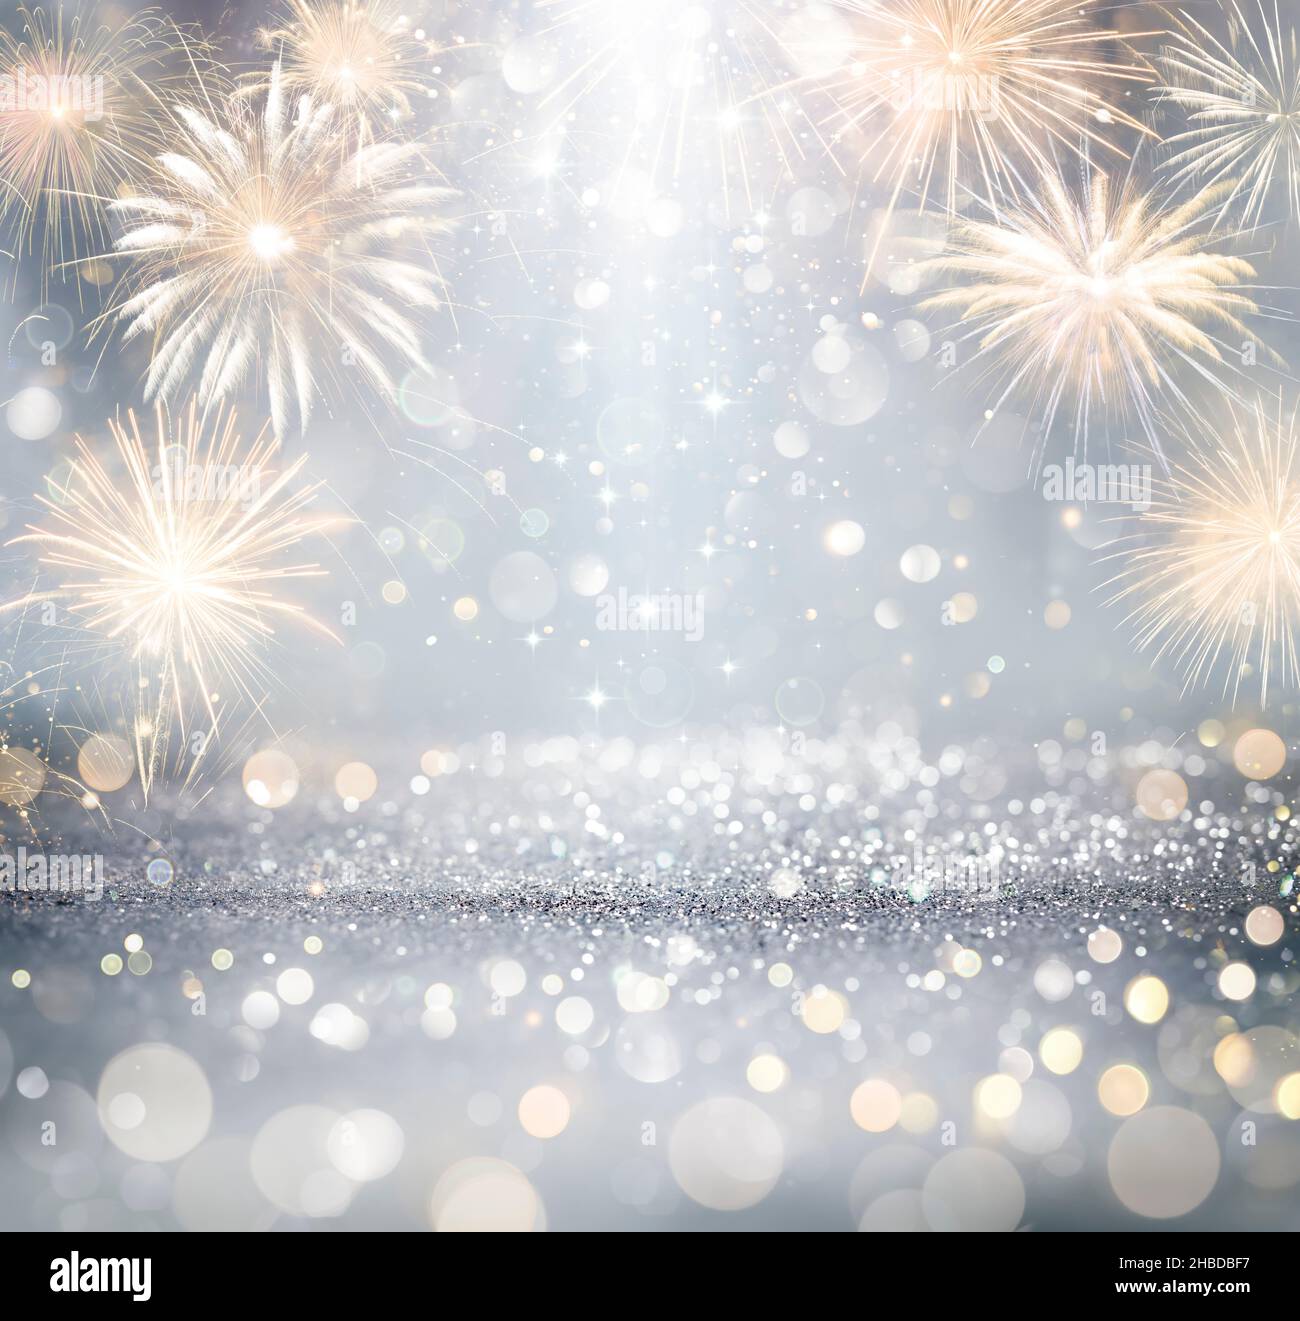 Silver Celebration With Fireworks And Glitter - New Year Anniversary With Defocused Abstract Lights Stock Photo